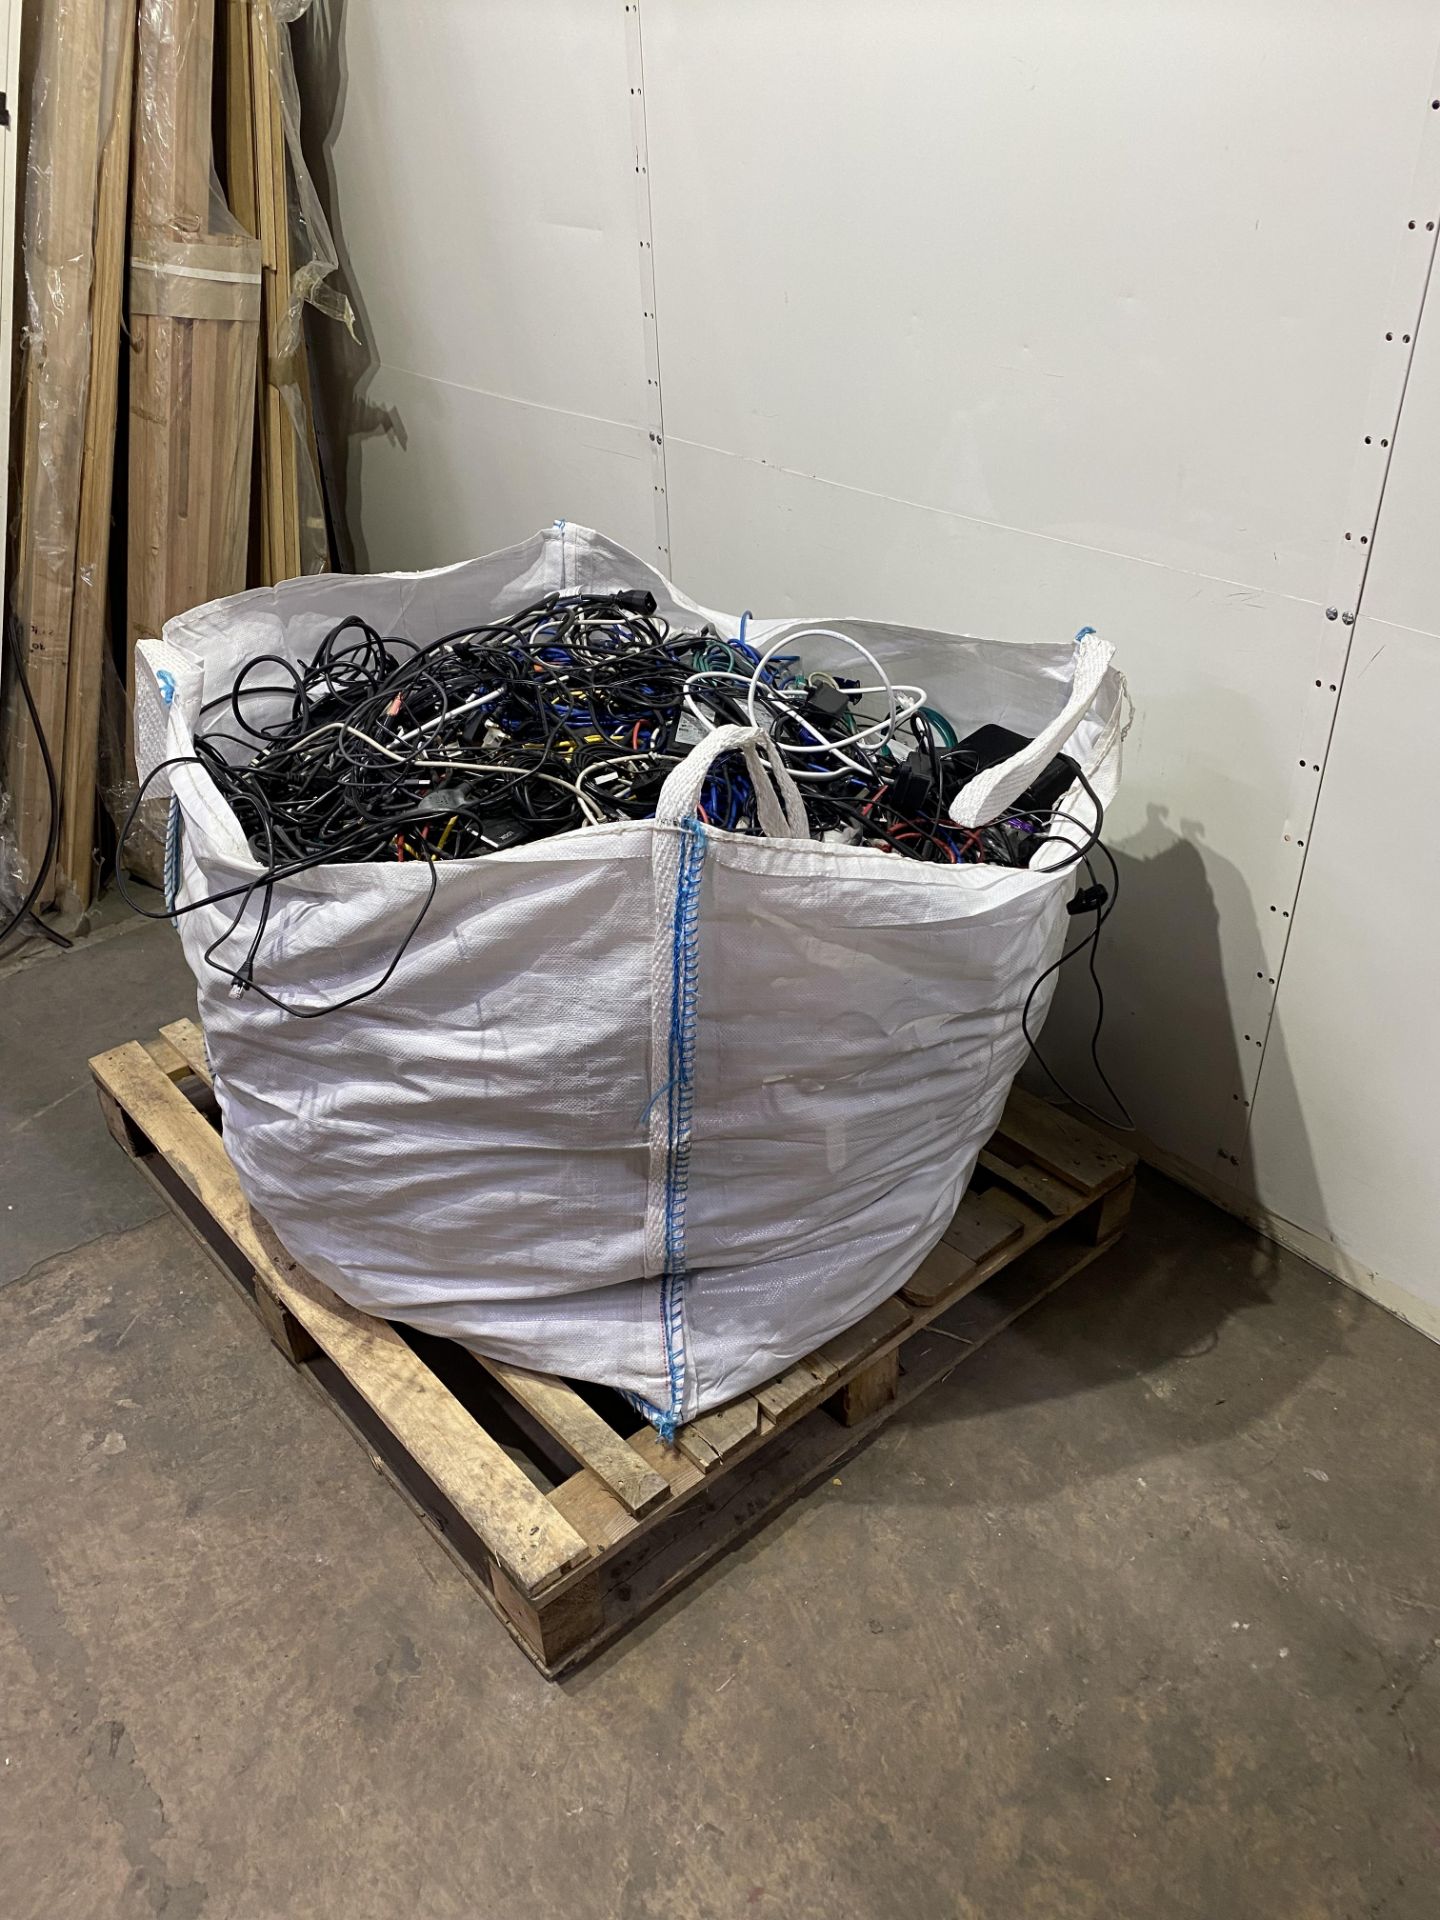 Large Quantity Of Various Electronic Wires, 140kg Bag - Image 4 of 12